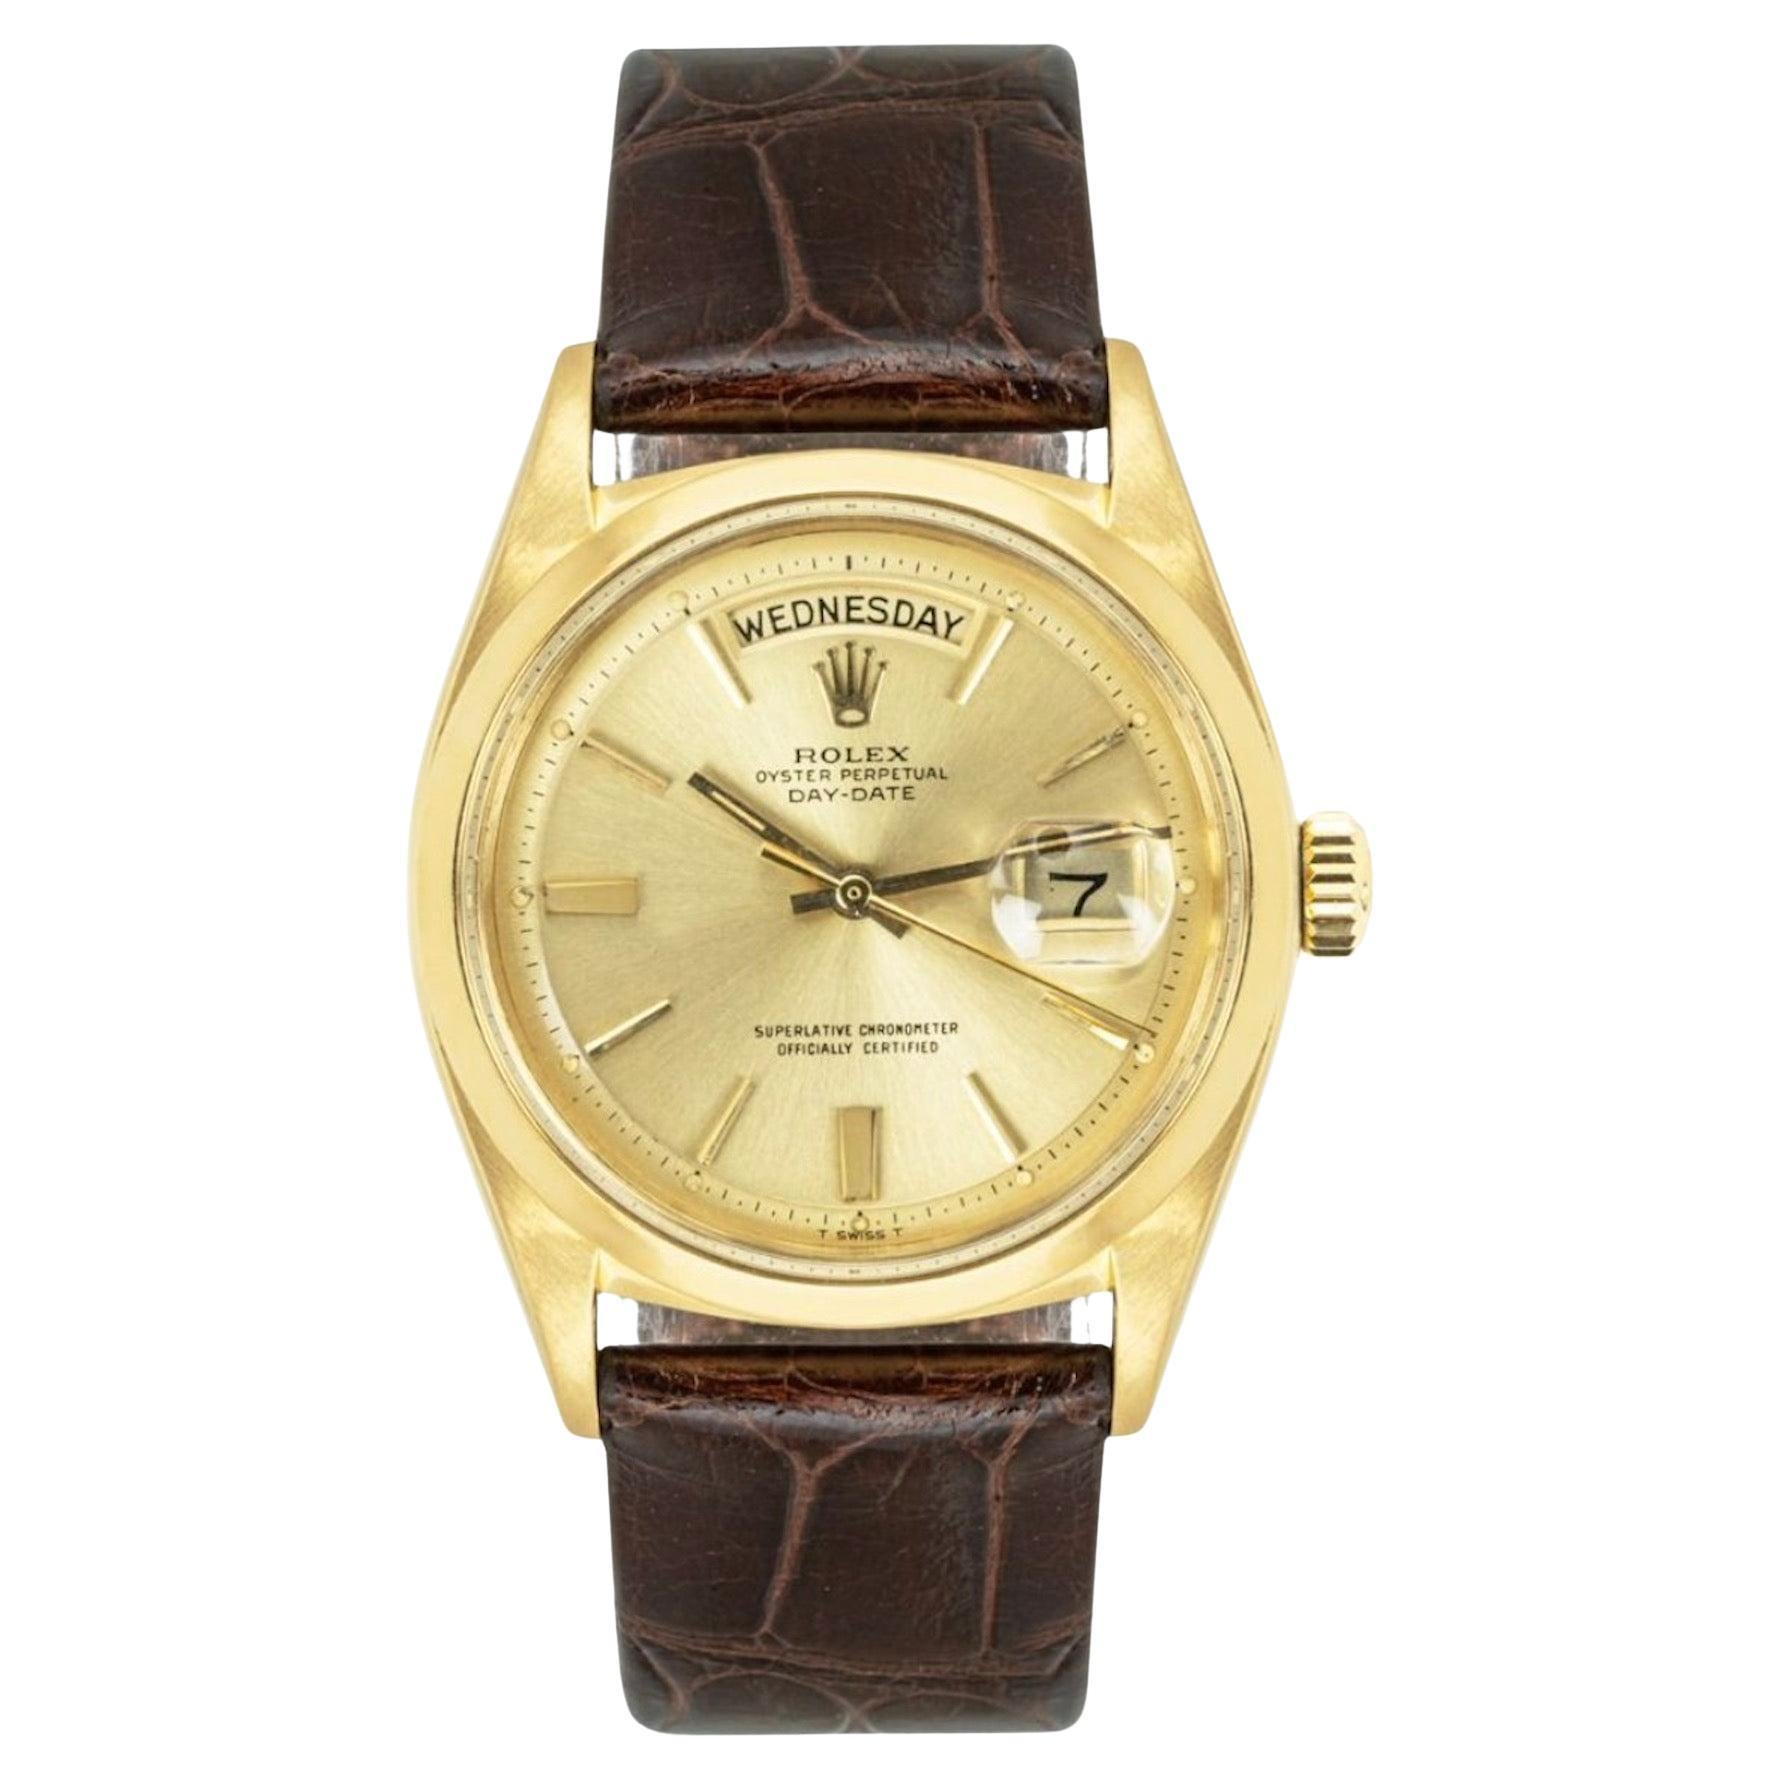 Vintage Rolex Day-Date Yellow Gold 1802